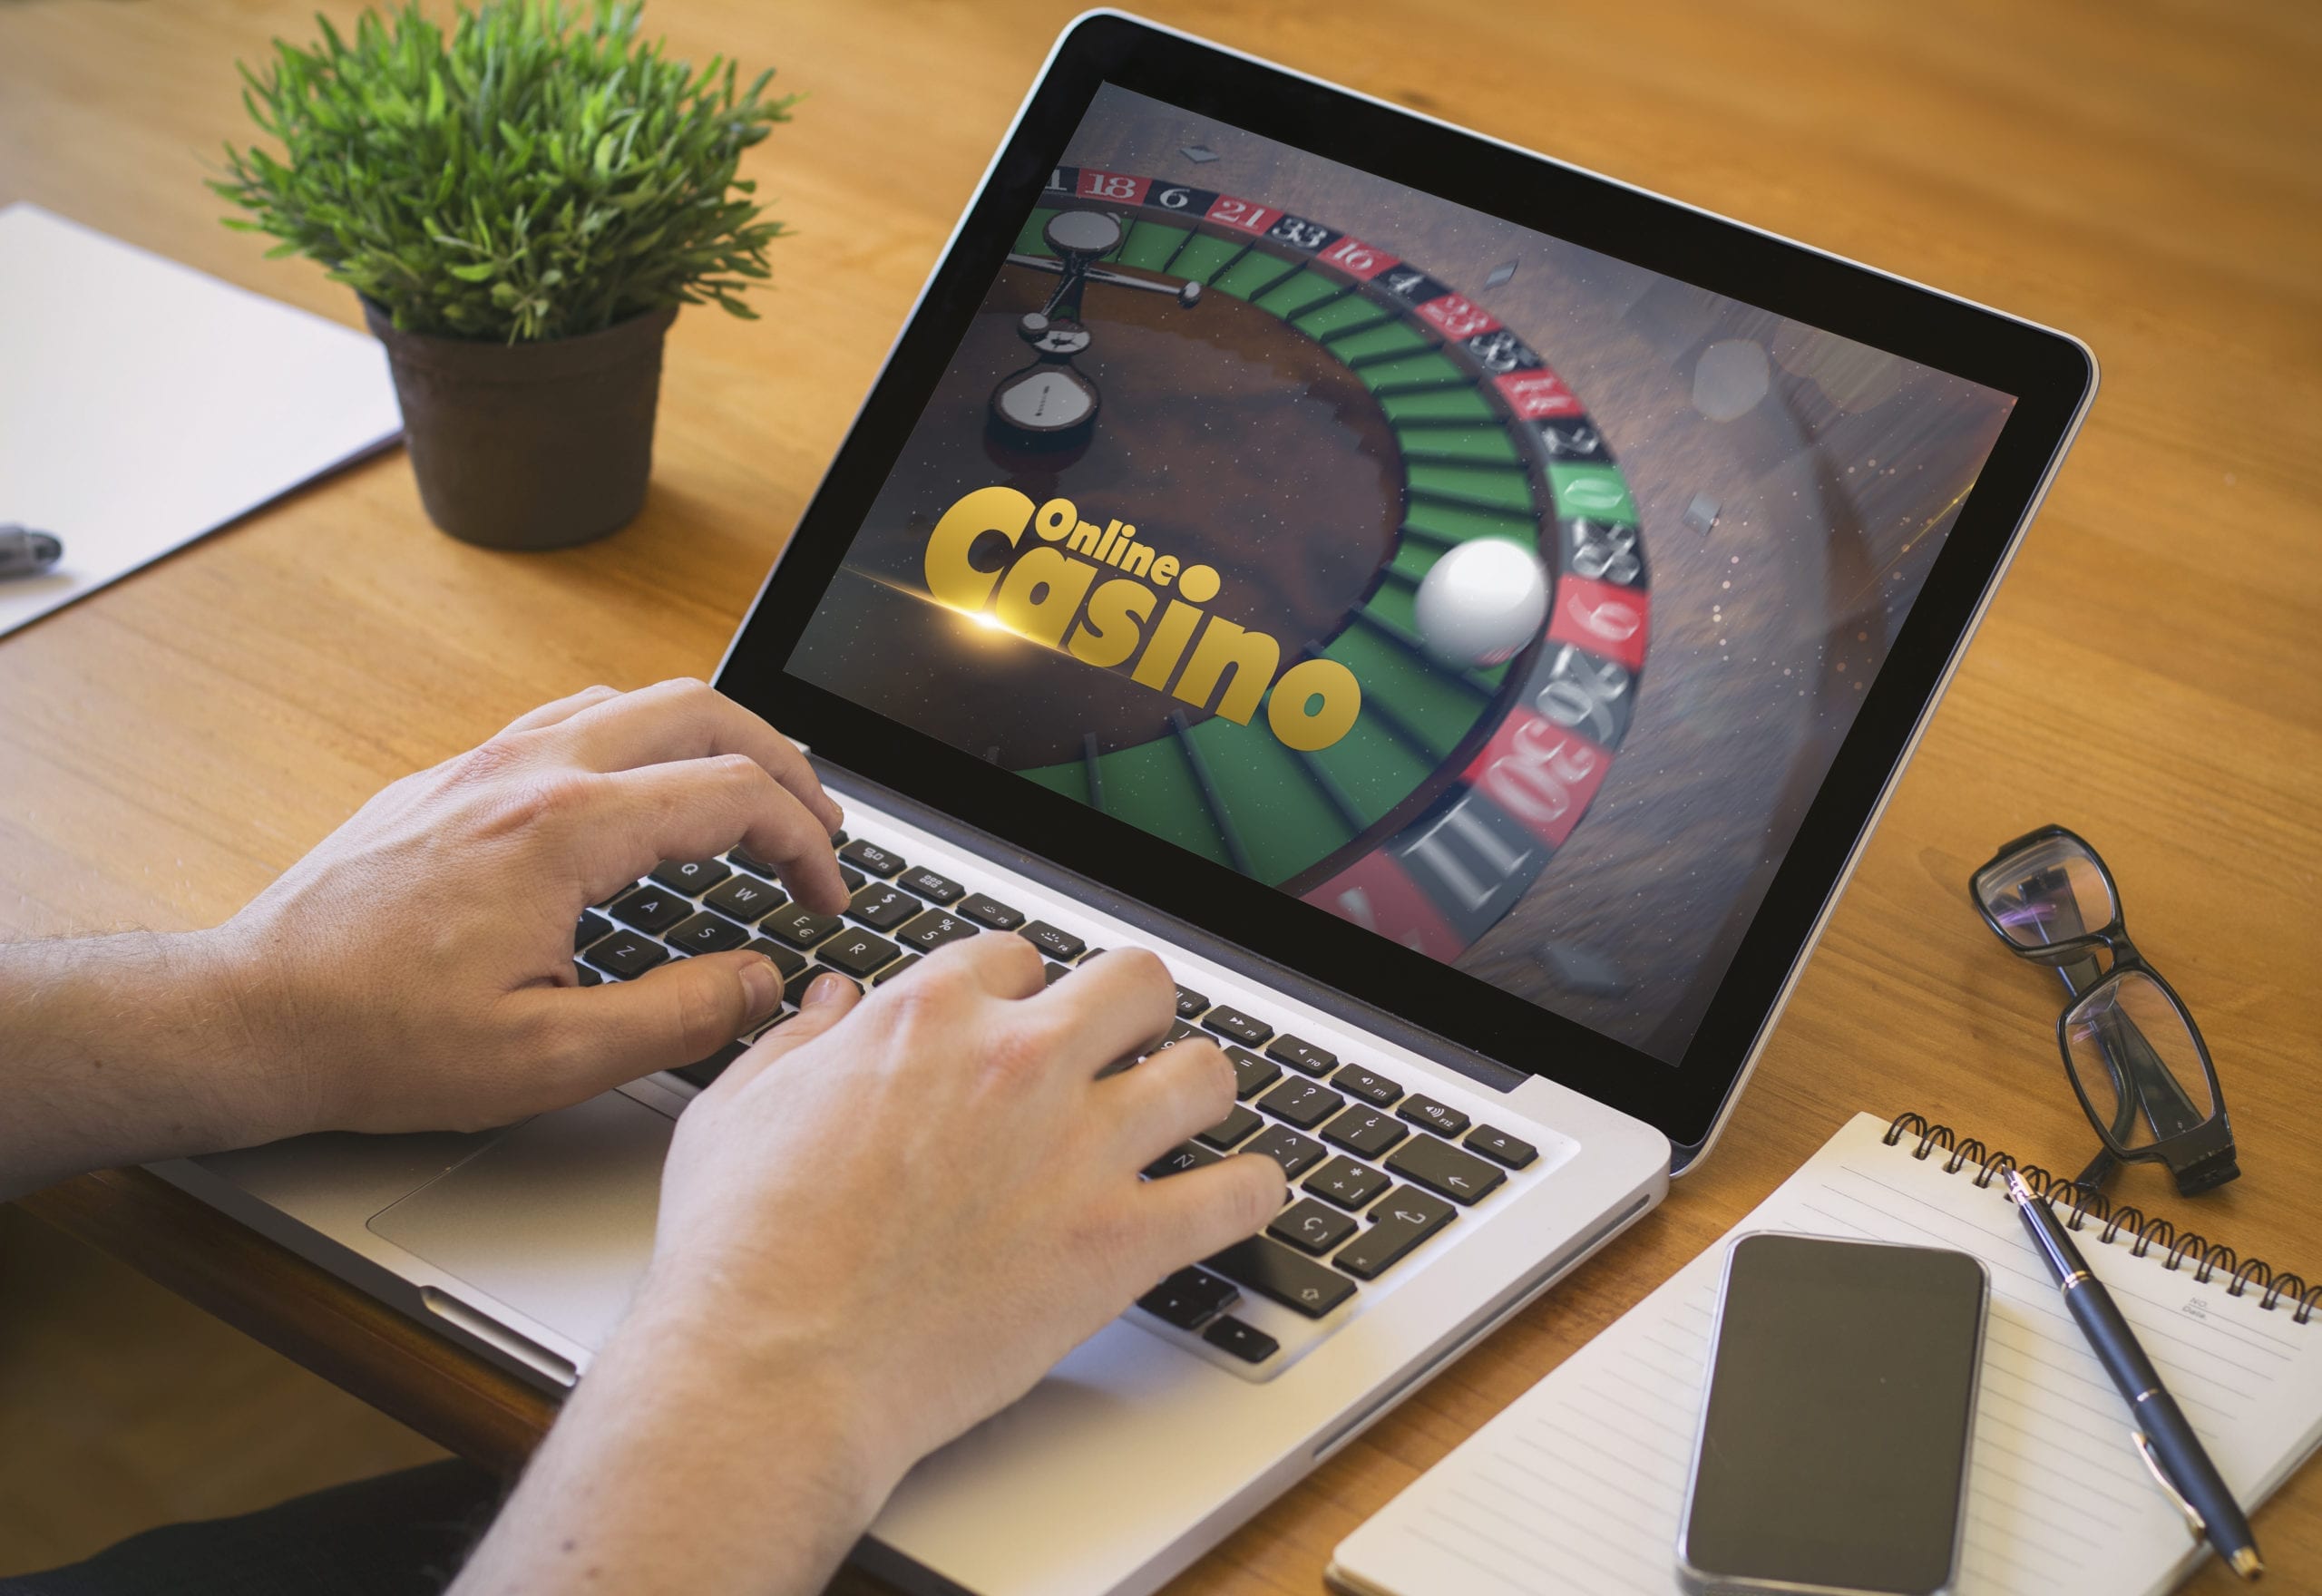 Are you looking for a real way of earning money? Take advantage of a diverse selection of games and bonuses at 22Bet casino